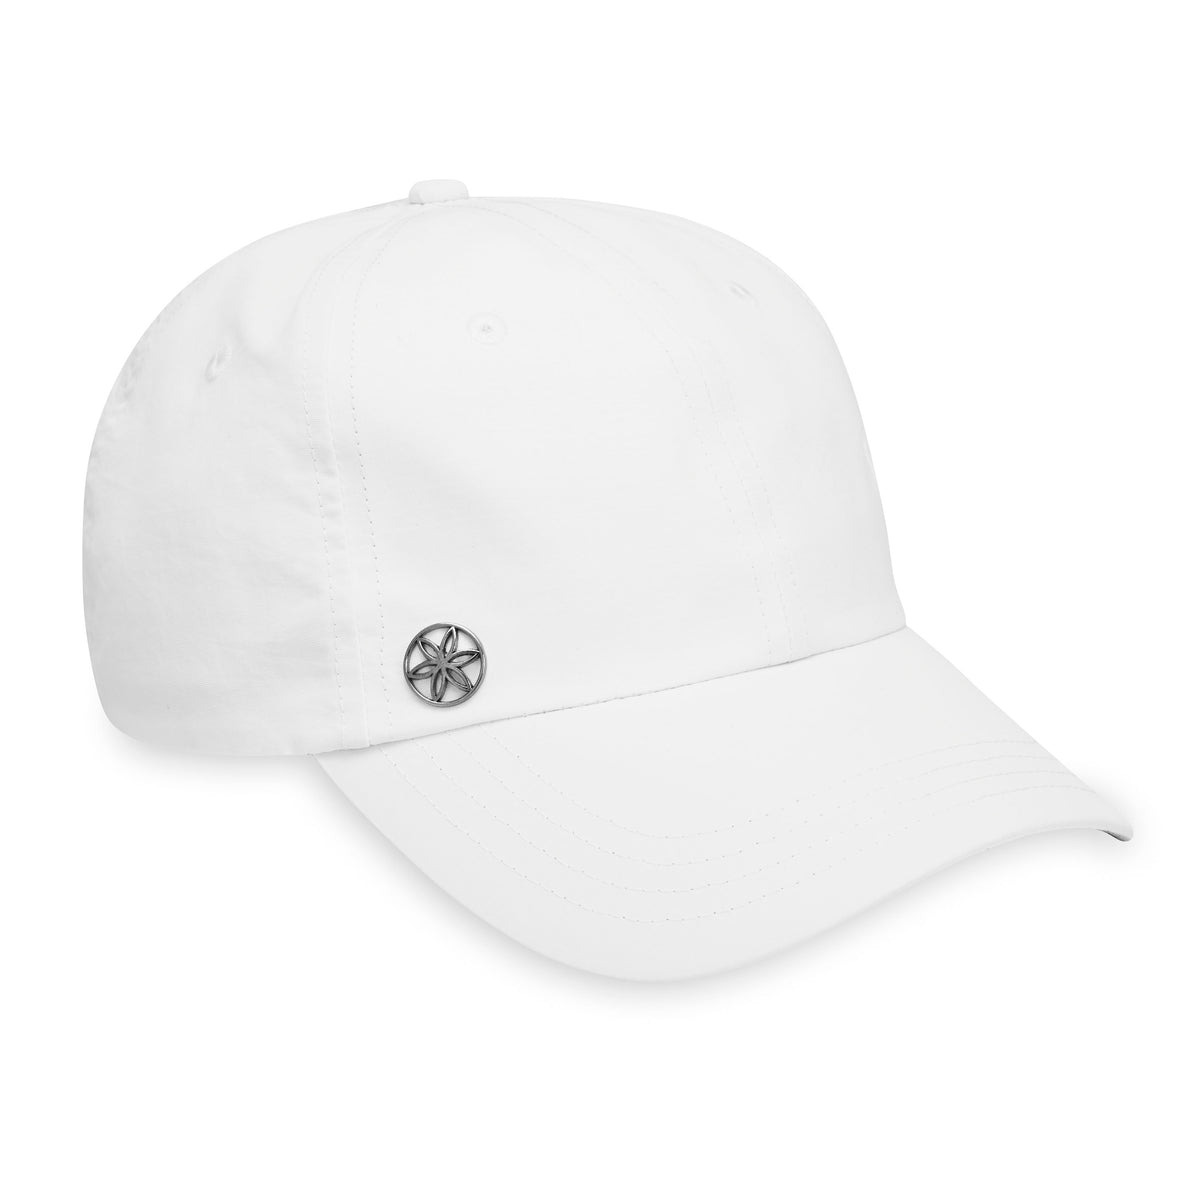 Planet Fitness hat thumbs up gear logo on white cap